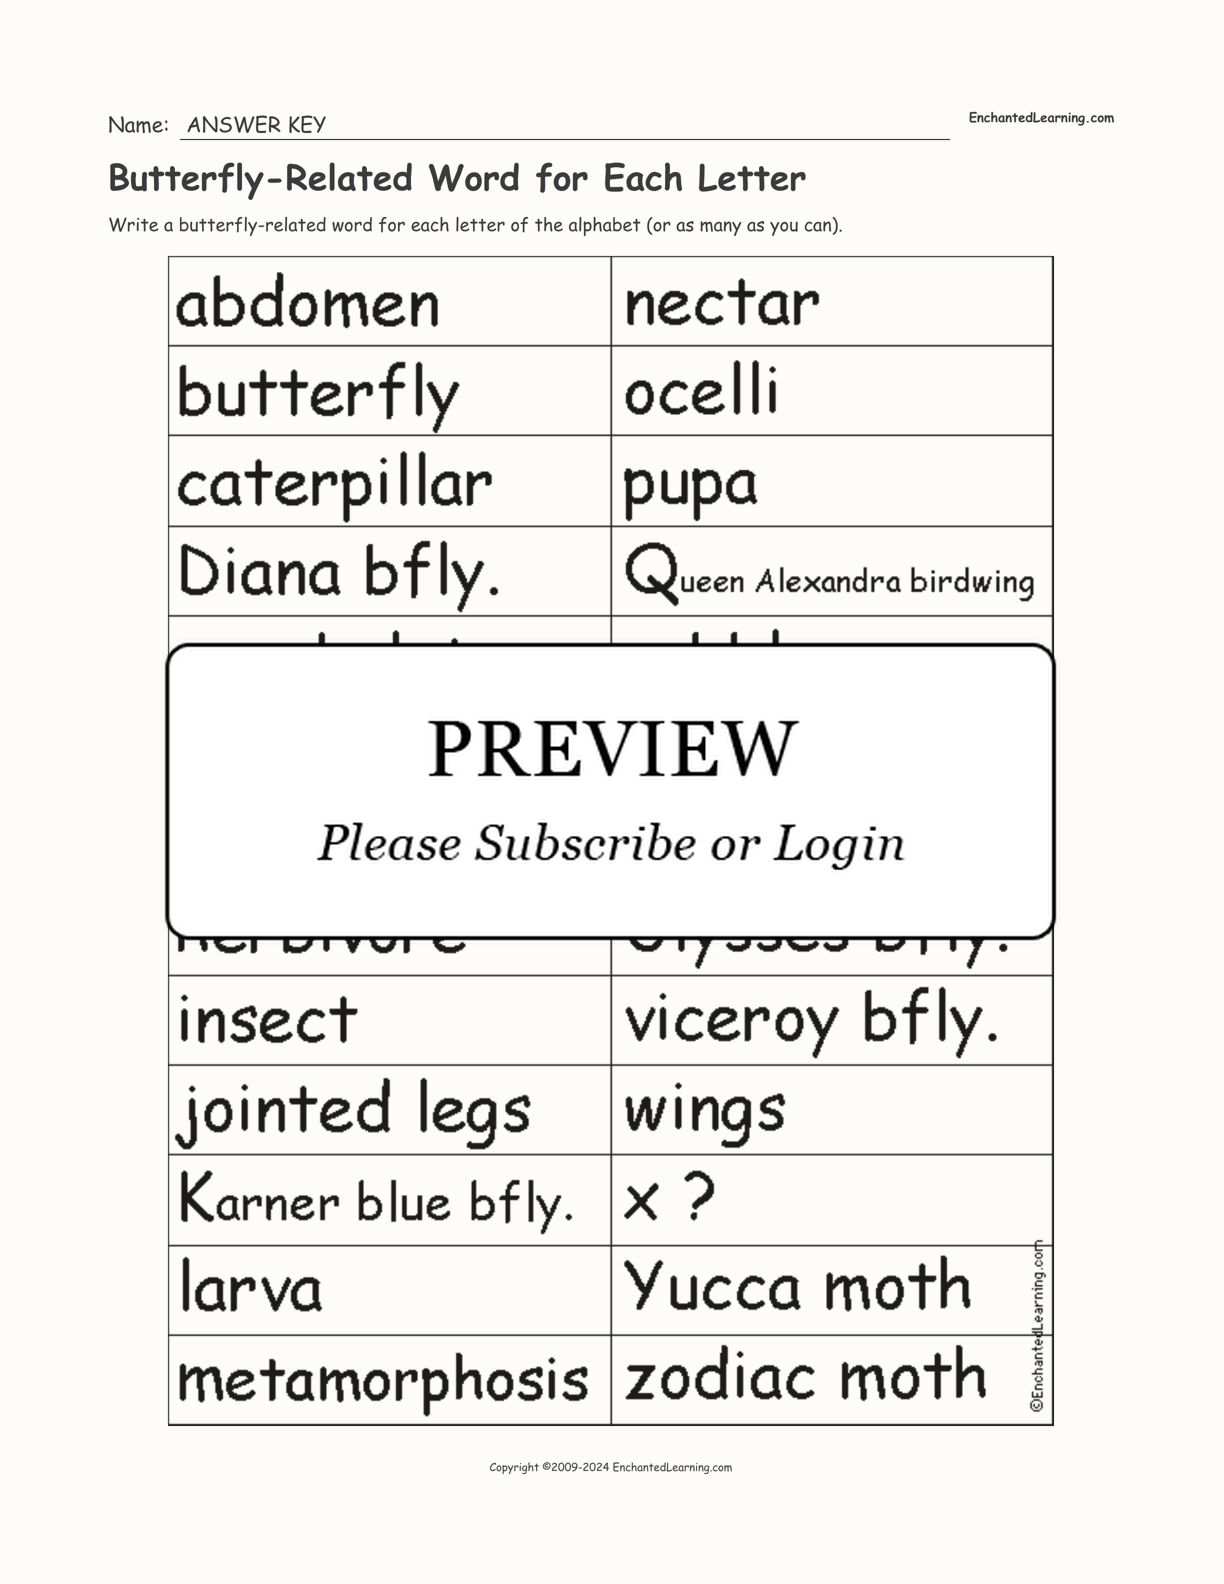 Butterfly-Related Word for Each Letter interactive worksheet page 2